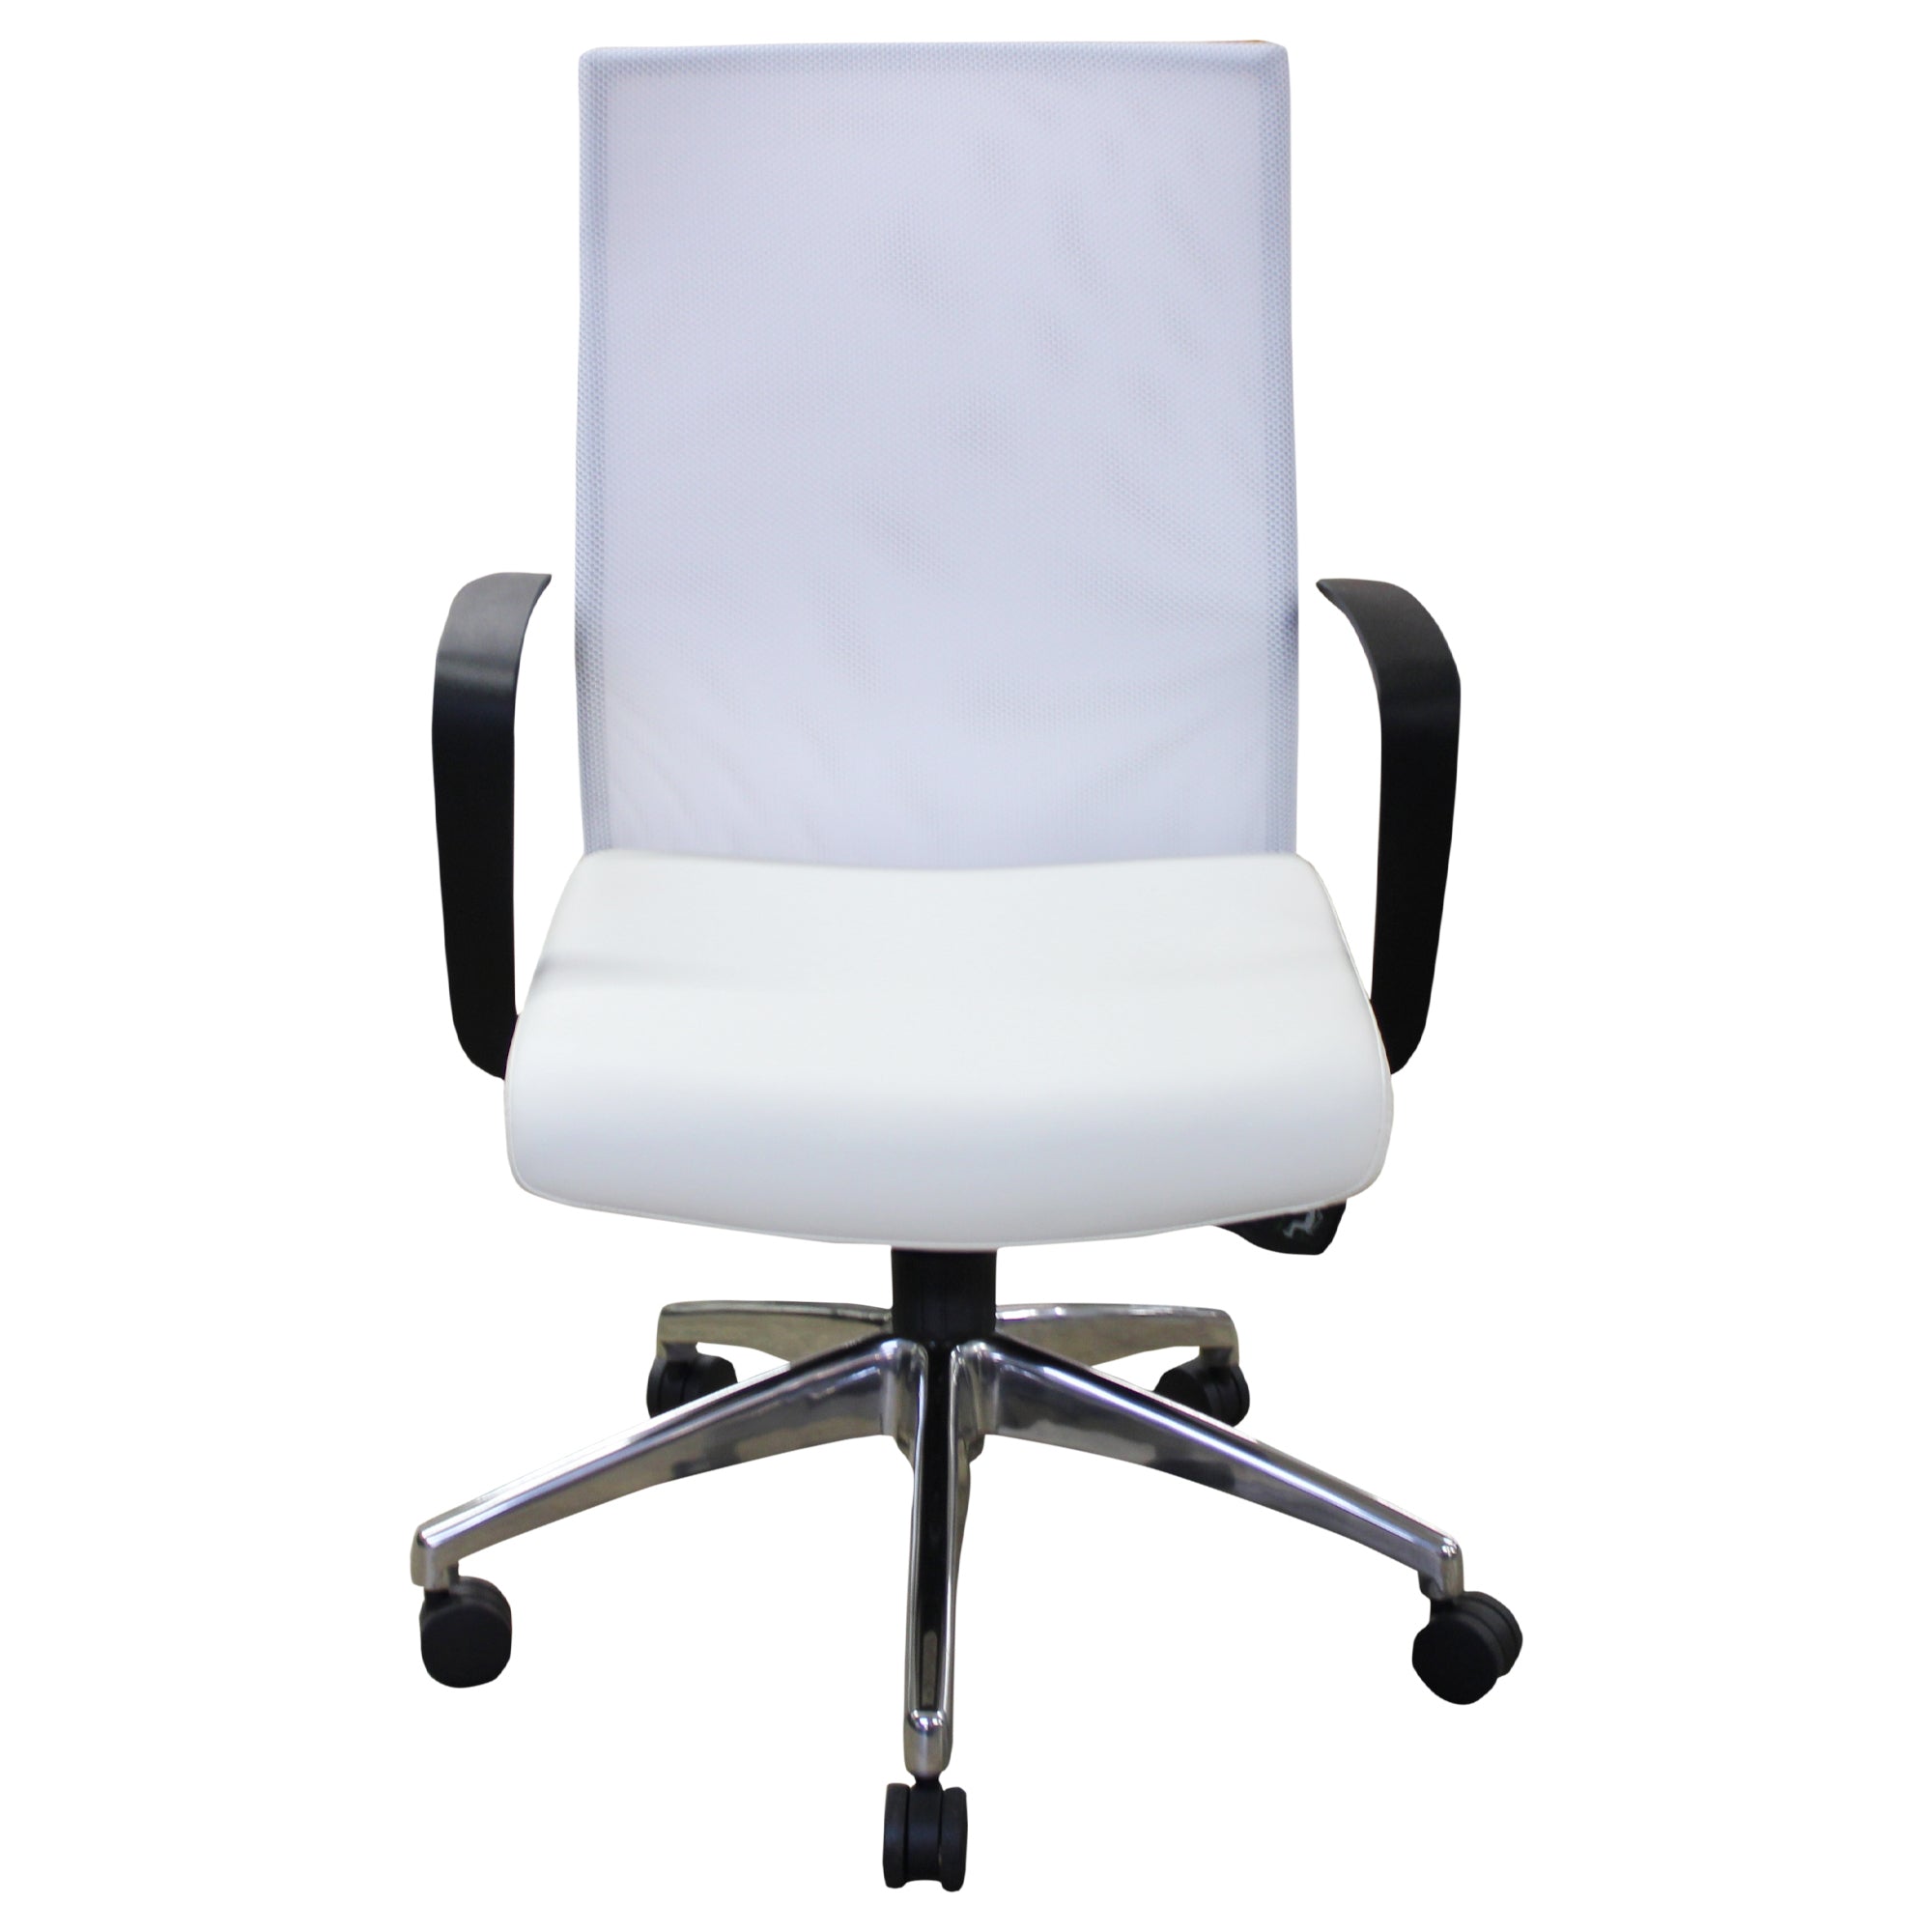 Compel Maxim Conference Chair, White - Preowned